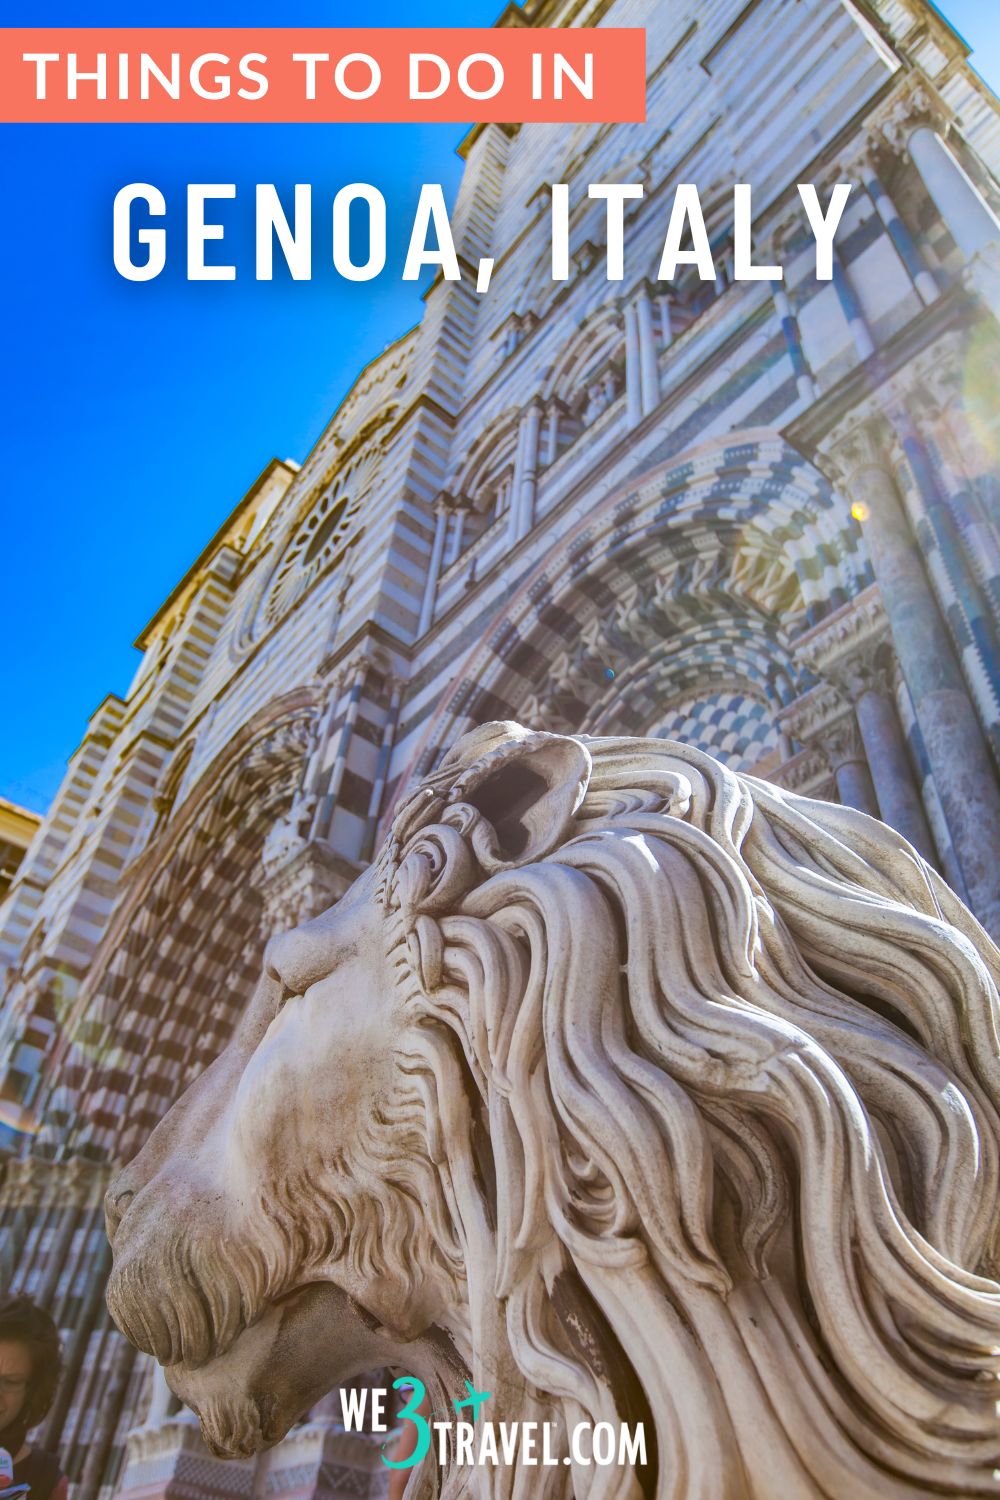 Wondering what to do in Genoa, Italy? This one-day Genoa itinerary outlines the best things to do in Genoa in just 24 hours!